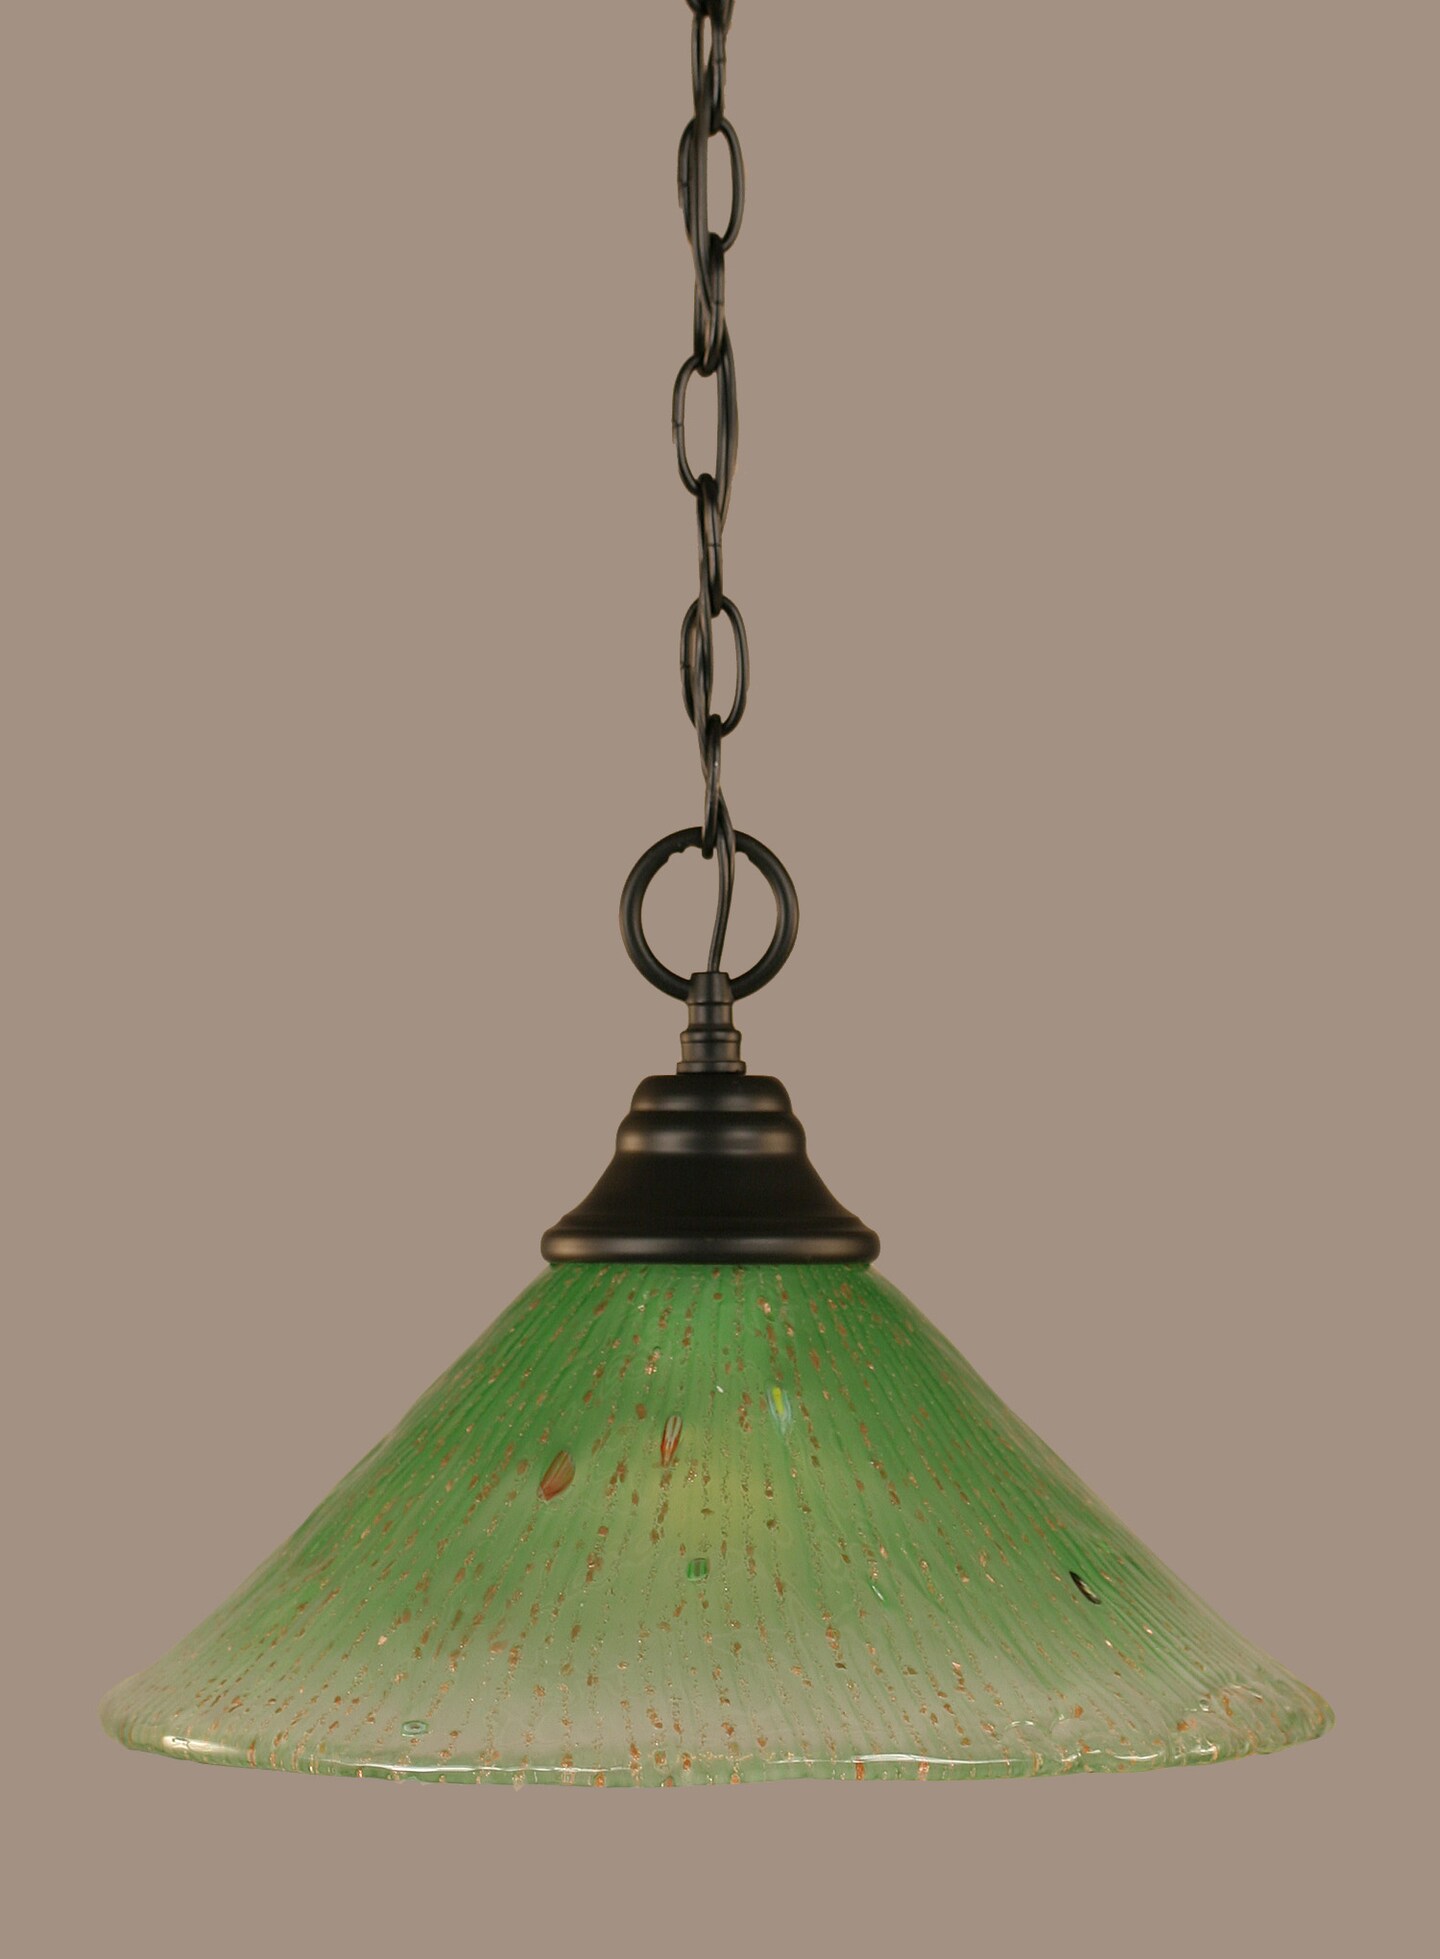 Chain Hung Pendant Shown In Matte Black Finish With 12 Kiwi Green Crystal Glass